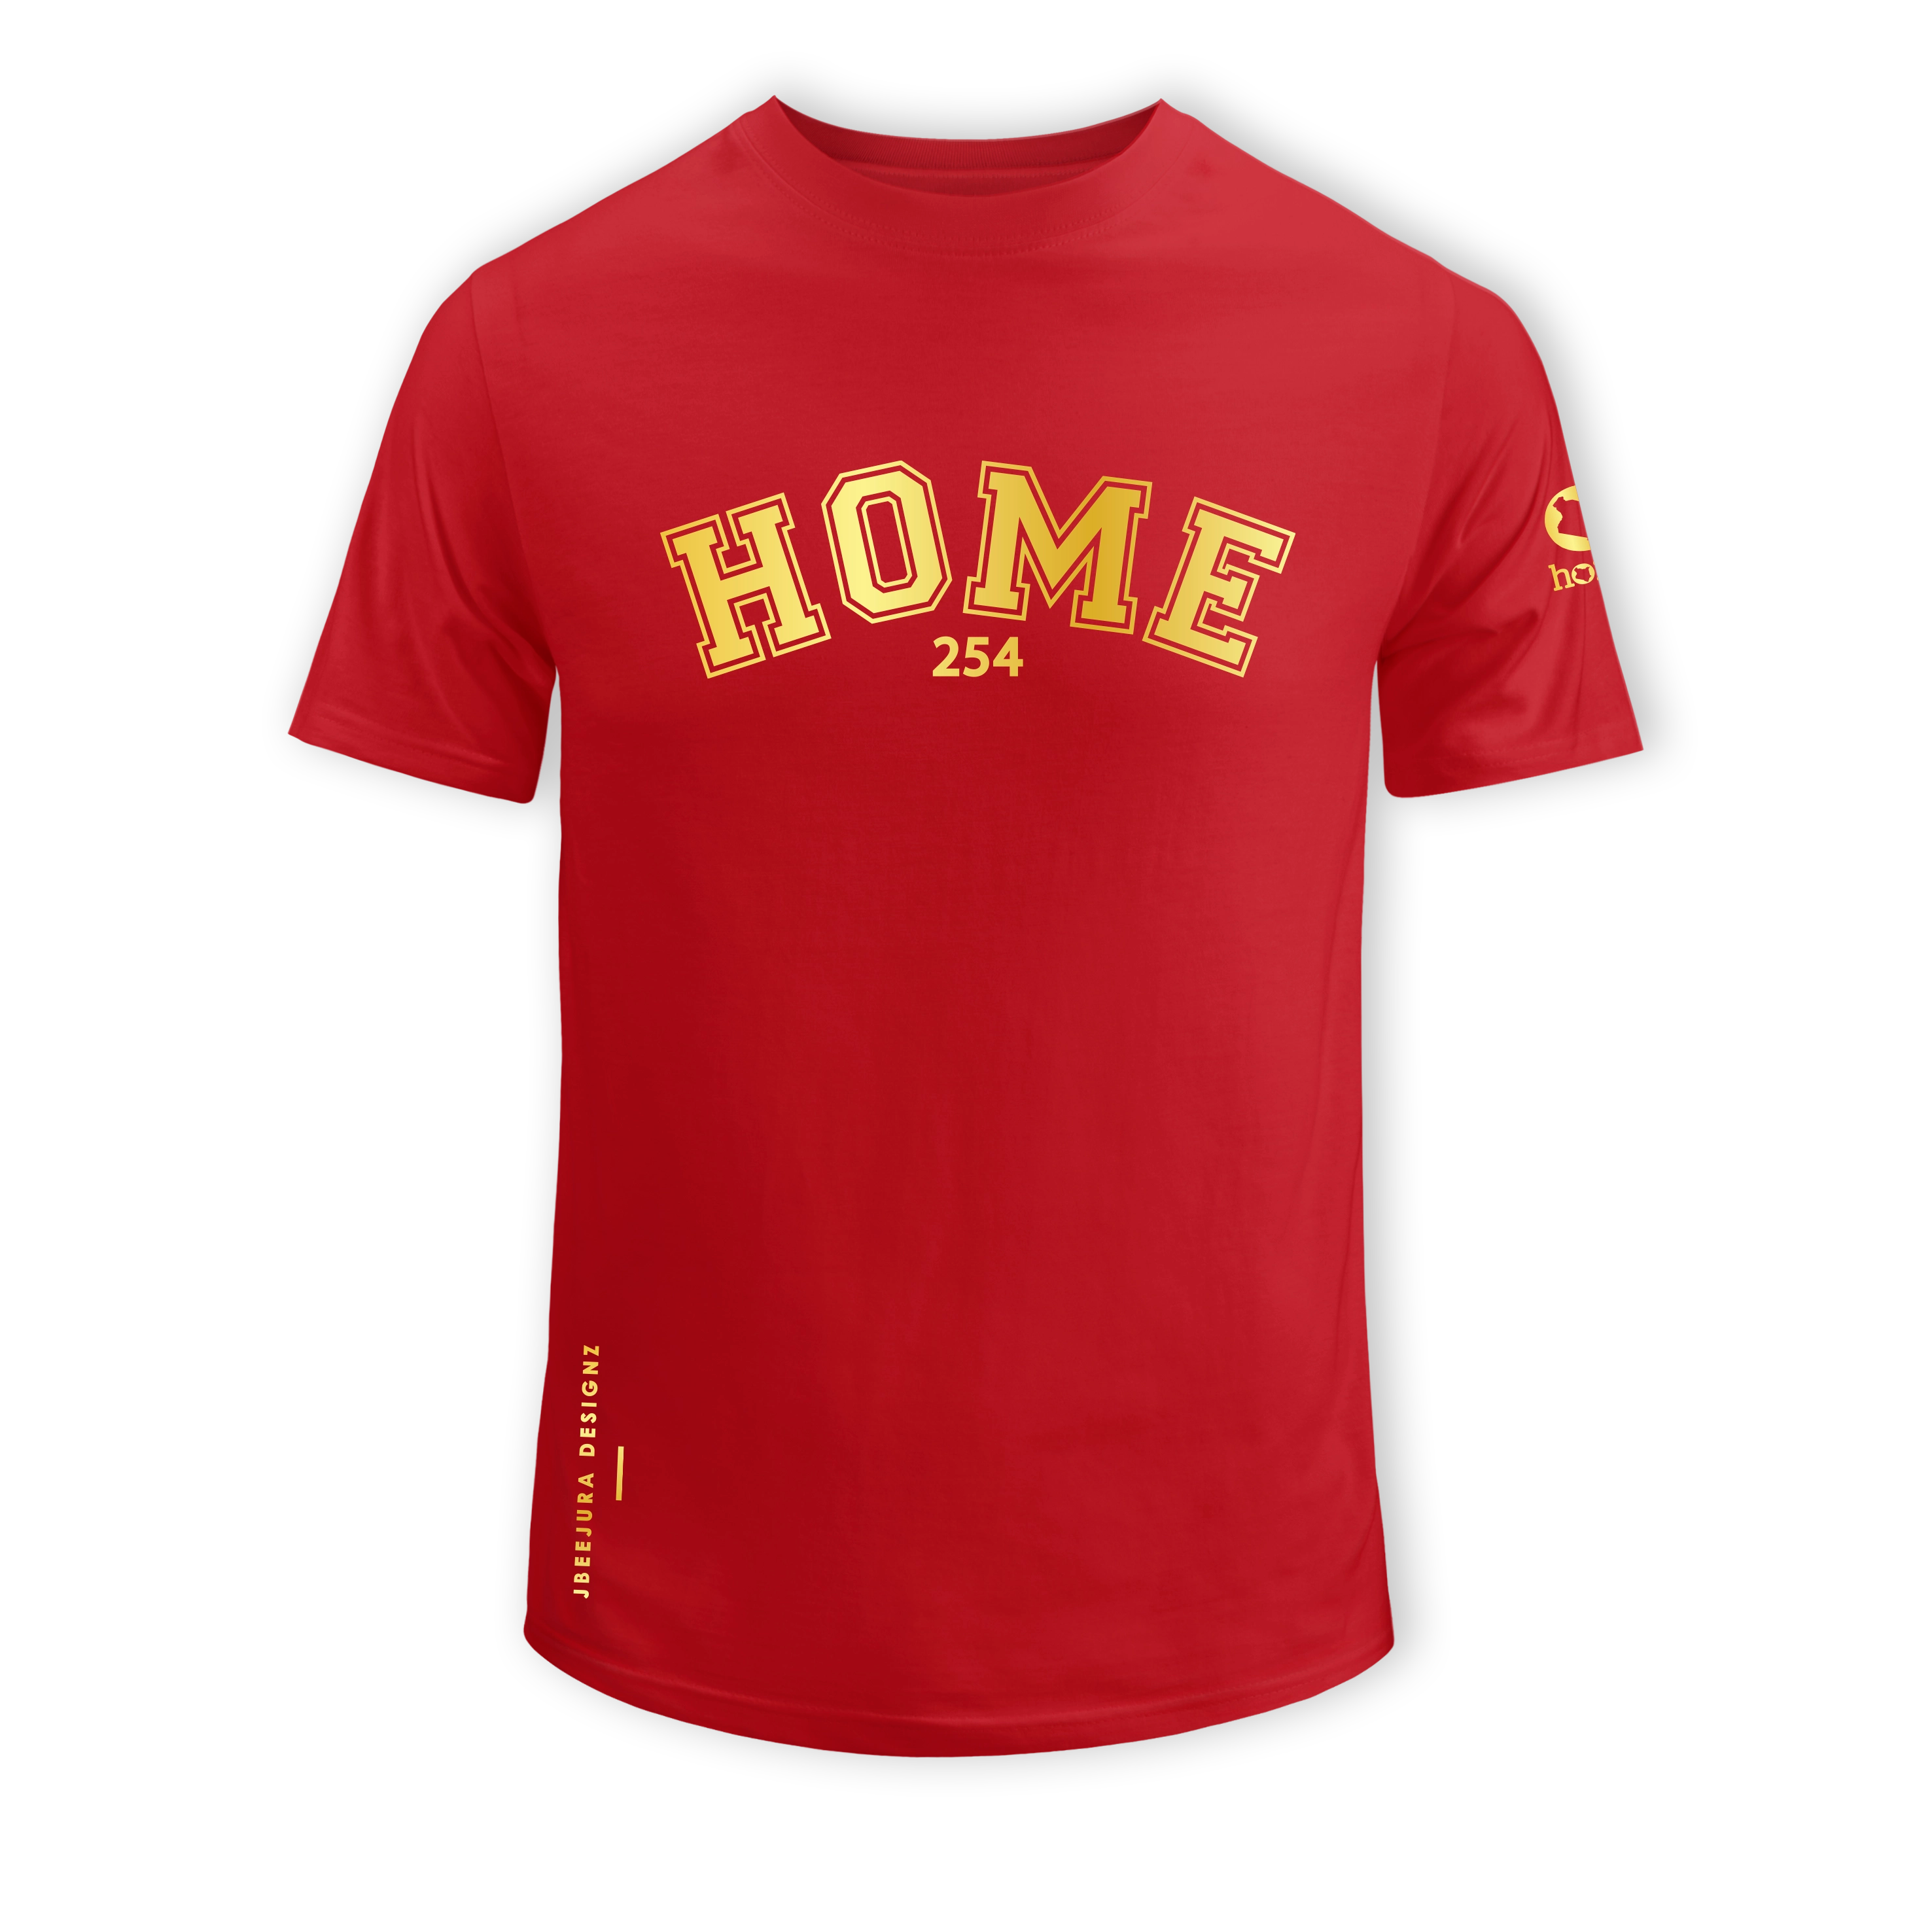 home_254 SHORT-SLEEVED RED T-SHIRT WITH A GOLD COLLEGE PRINT – COTTON PLUS FABRIC